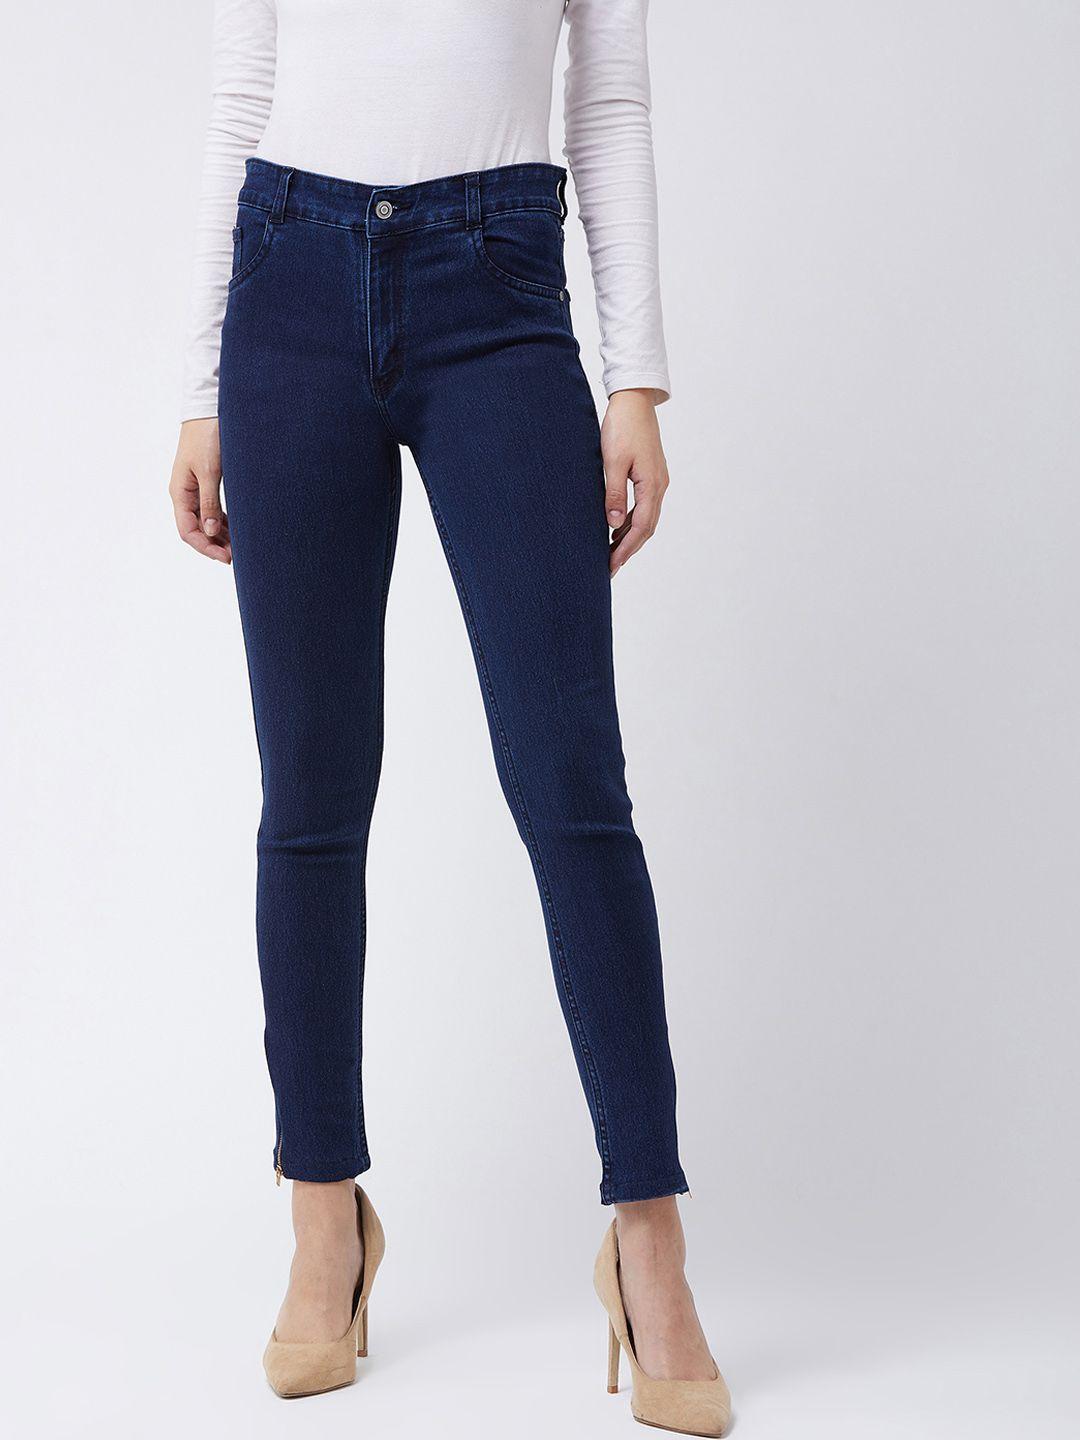 miss-chase-women-navy-blue-skinny-fit-mid-rise-clean-look-jeans